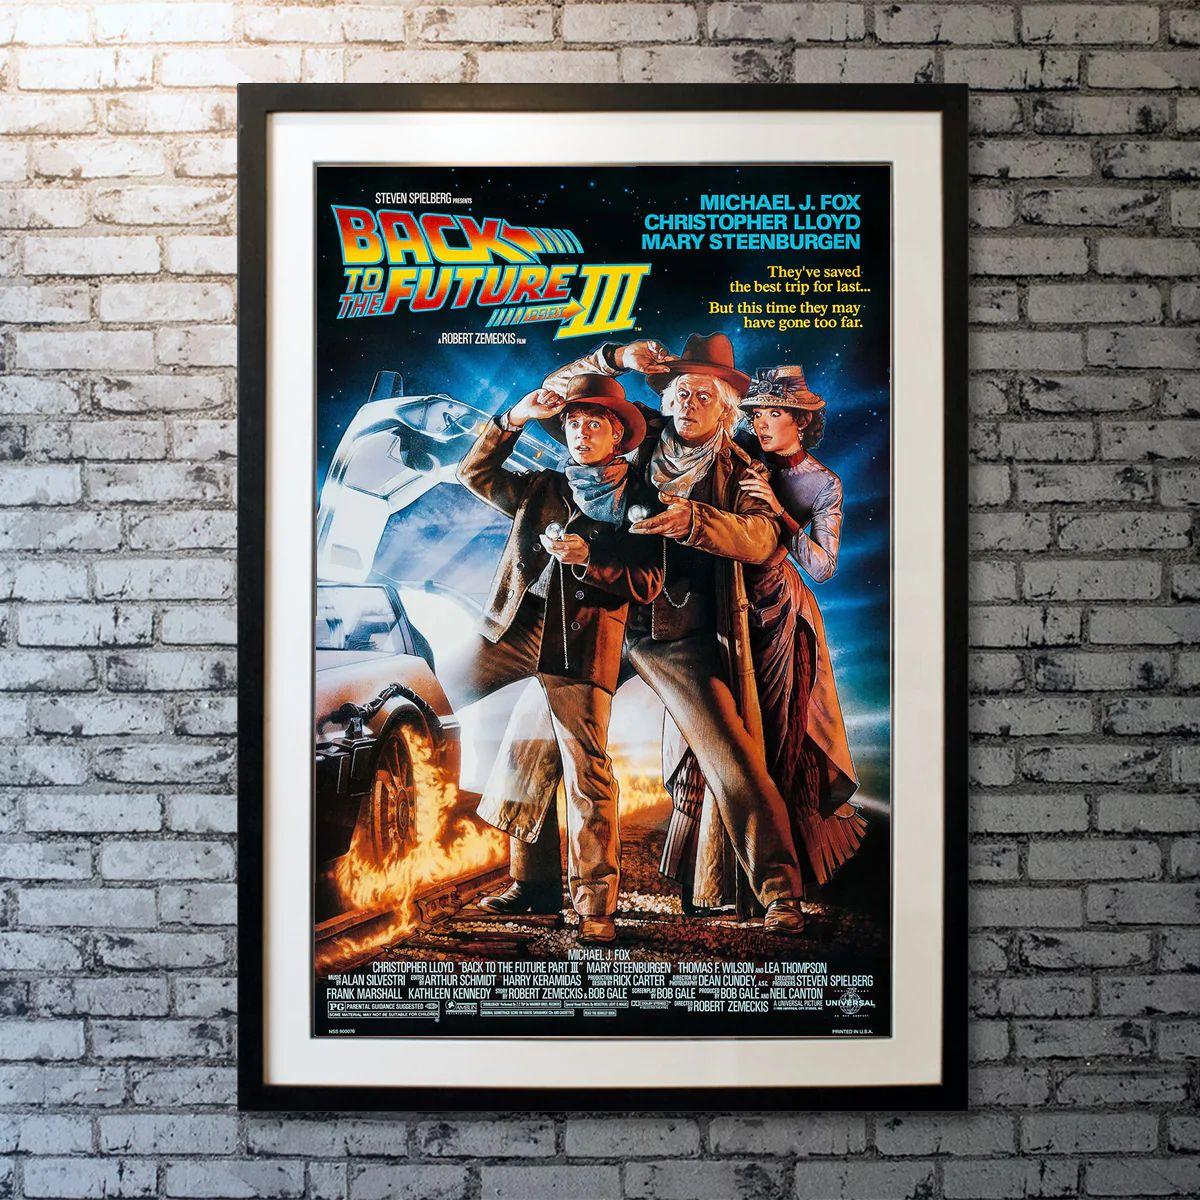 Back To The Future III, Unframed Poster, 1990

Stranded in 1955, Marty McFly learns about the death of Doc Brown in 1885 and must travel back in time to save him. With no fuel readily available for the DeLorean, the two must figure how to escape